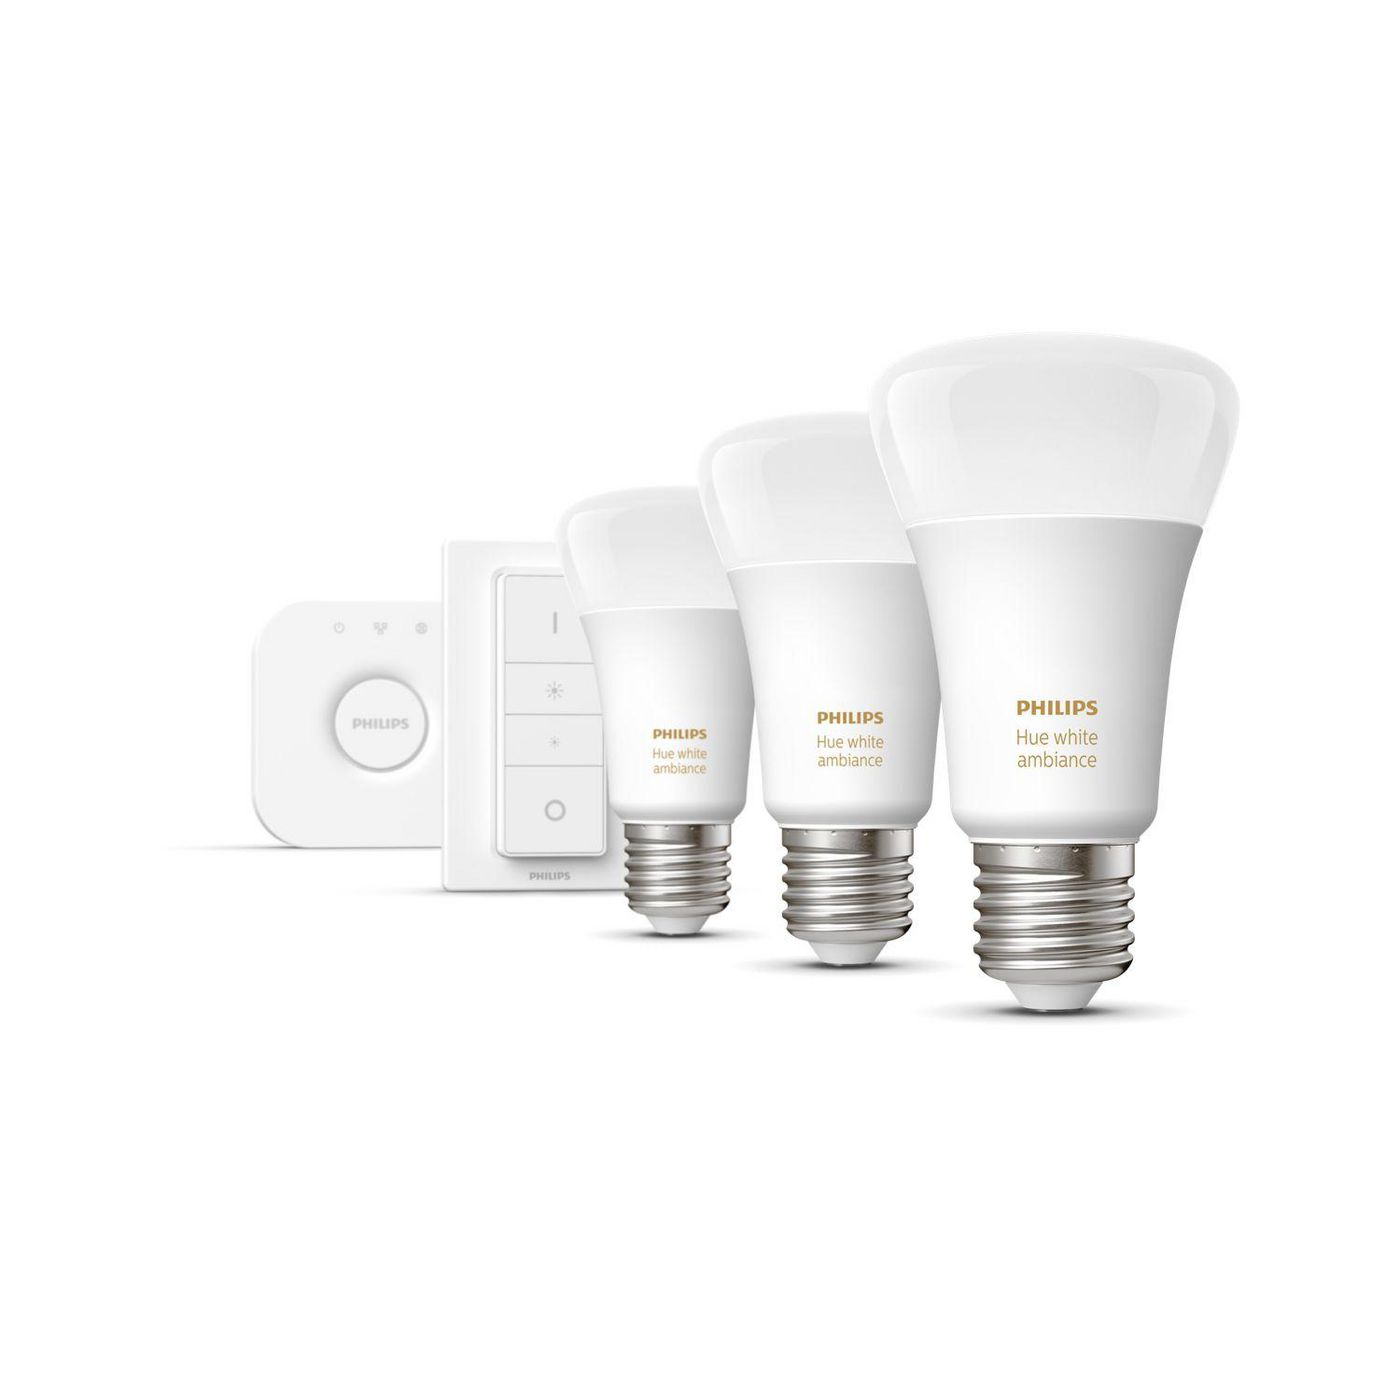 Philips-by-Signify 929002216903 Hue White Ambiance 3xE27 